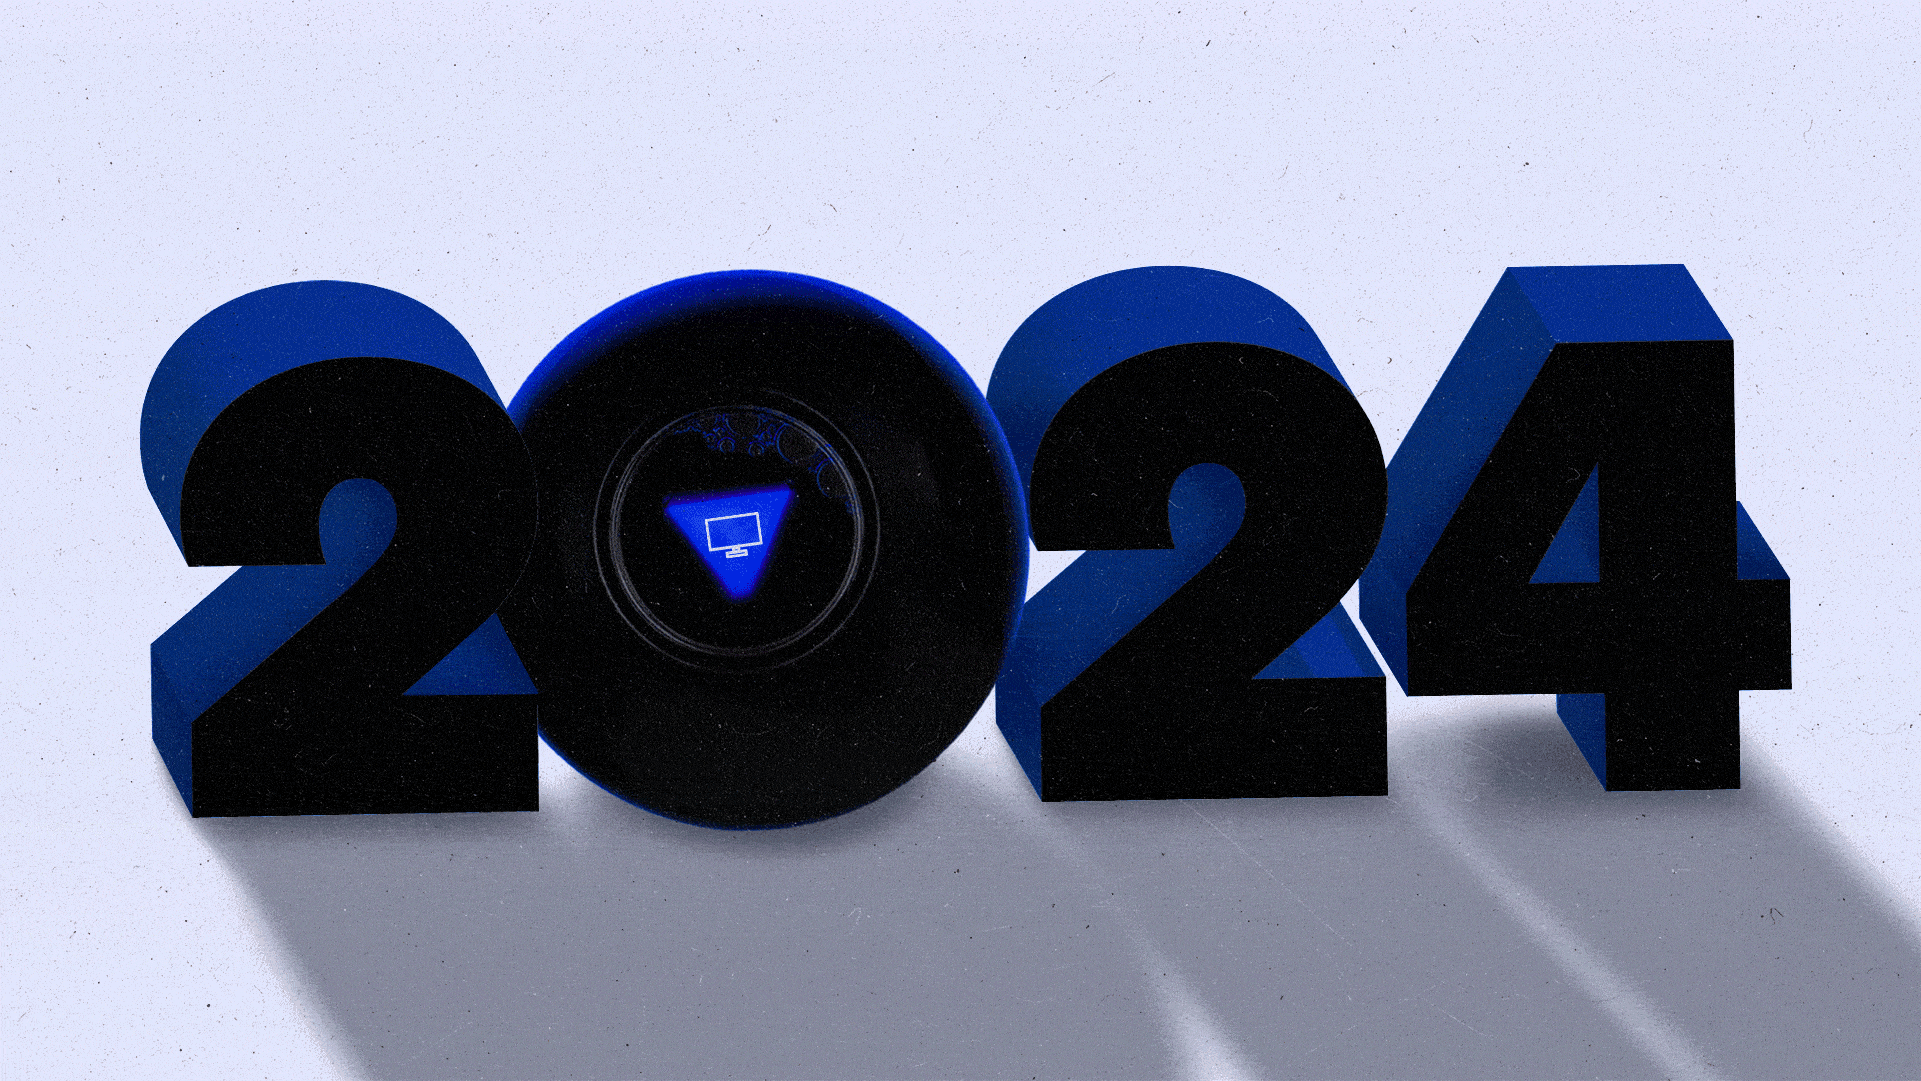 3D number 2024 with the 0 replaced by a magic 8 ball animated to display the '8 ball answers' of a tv screen and a shopping cart.